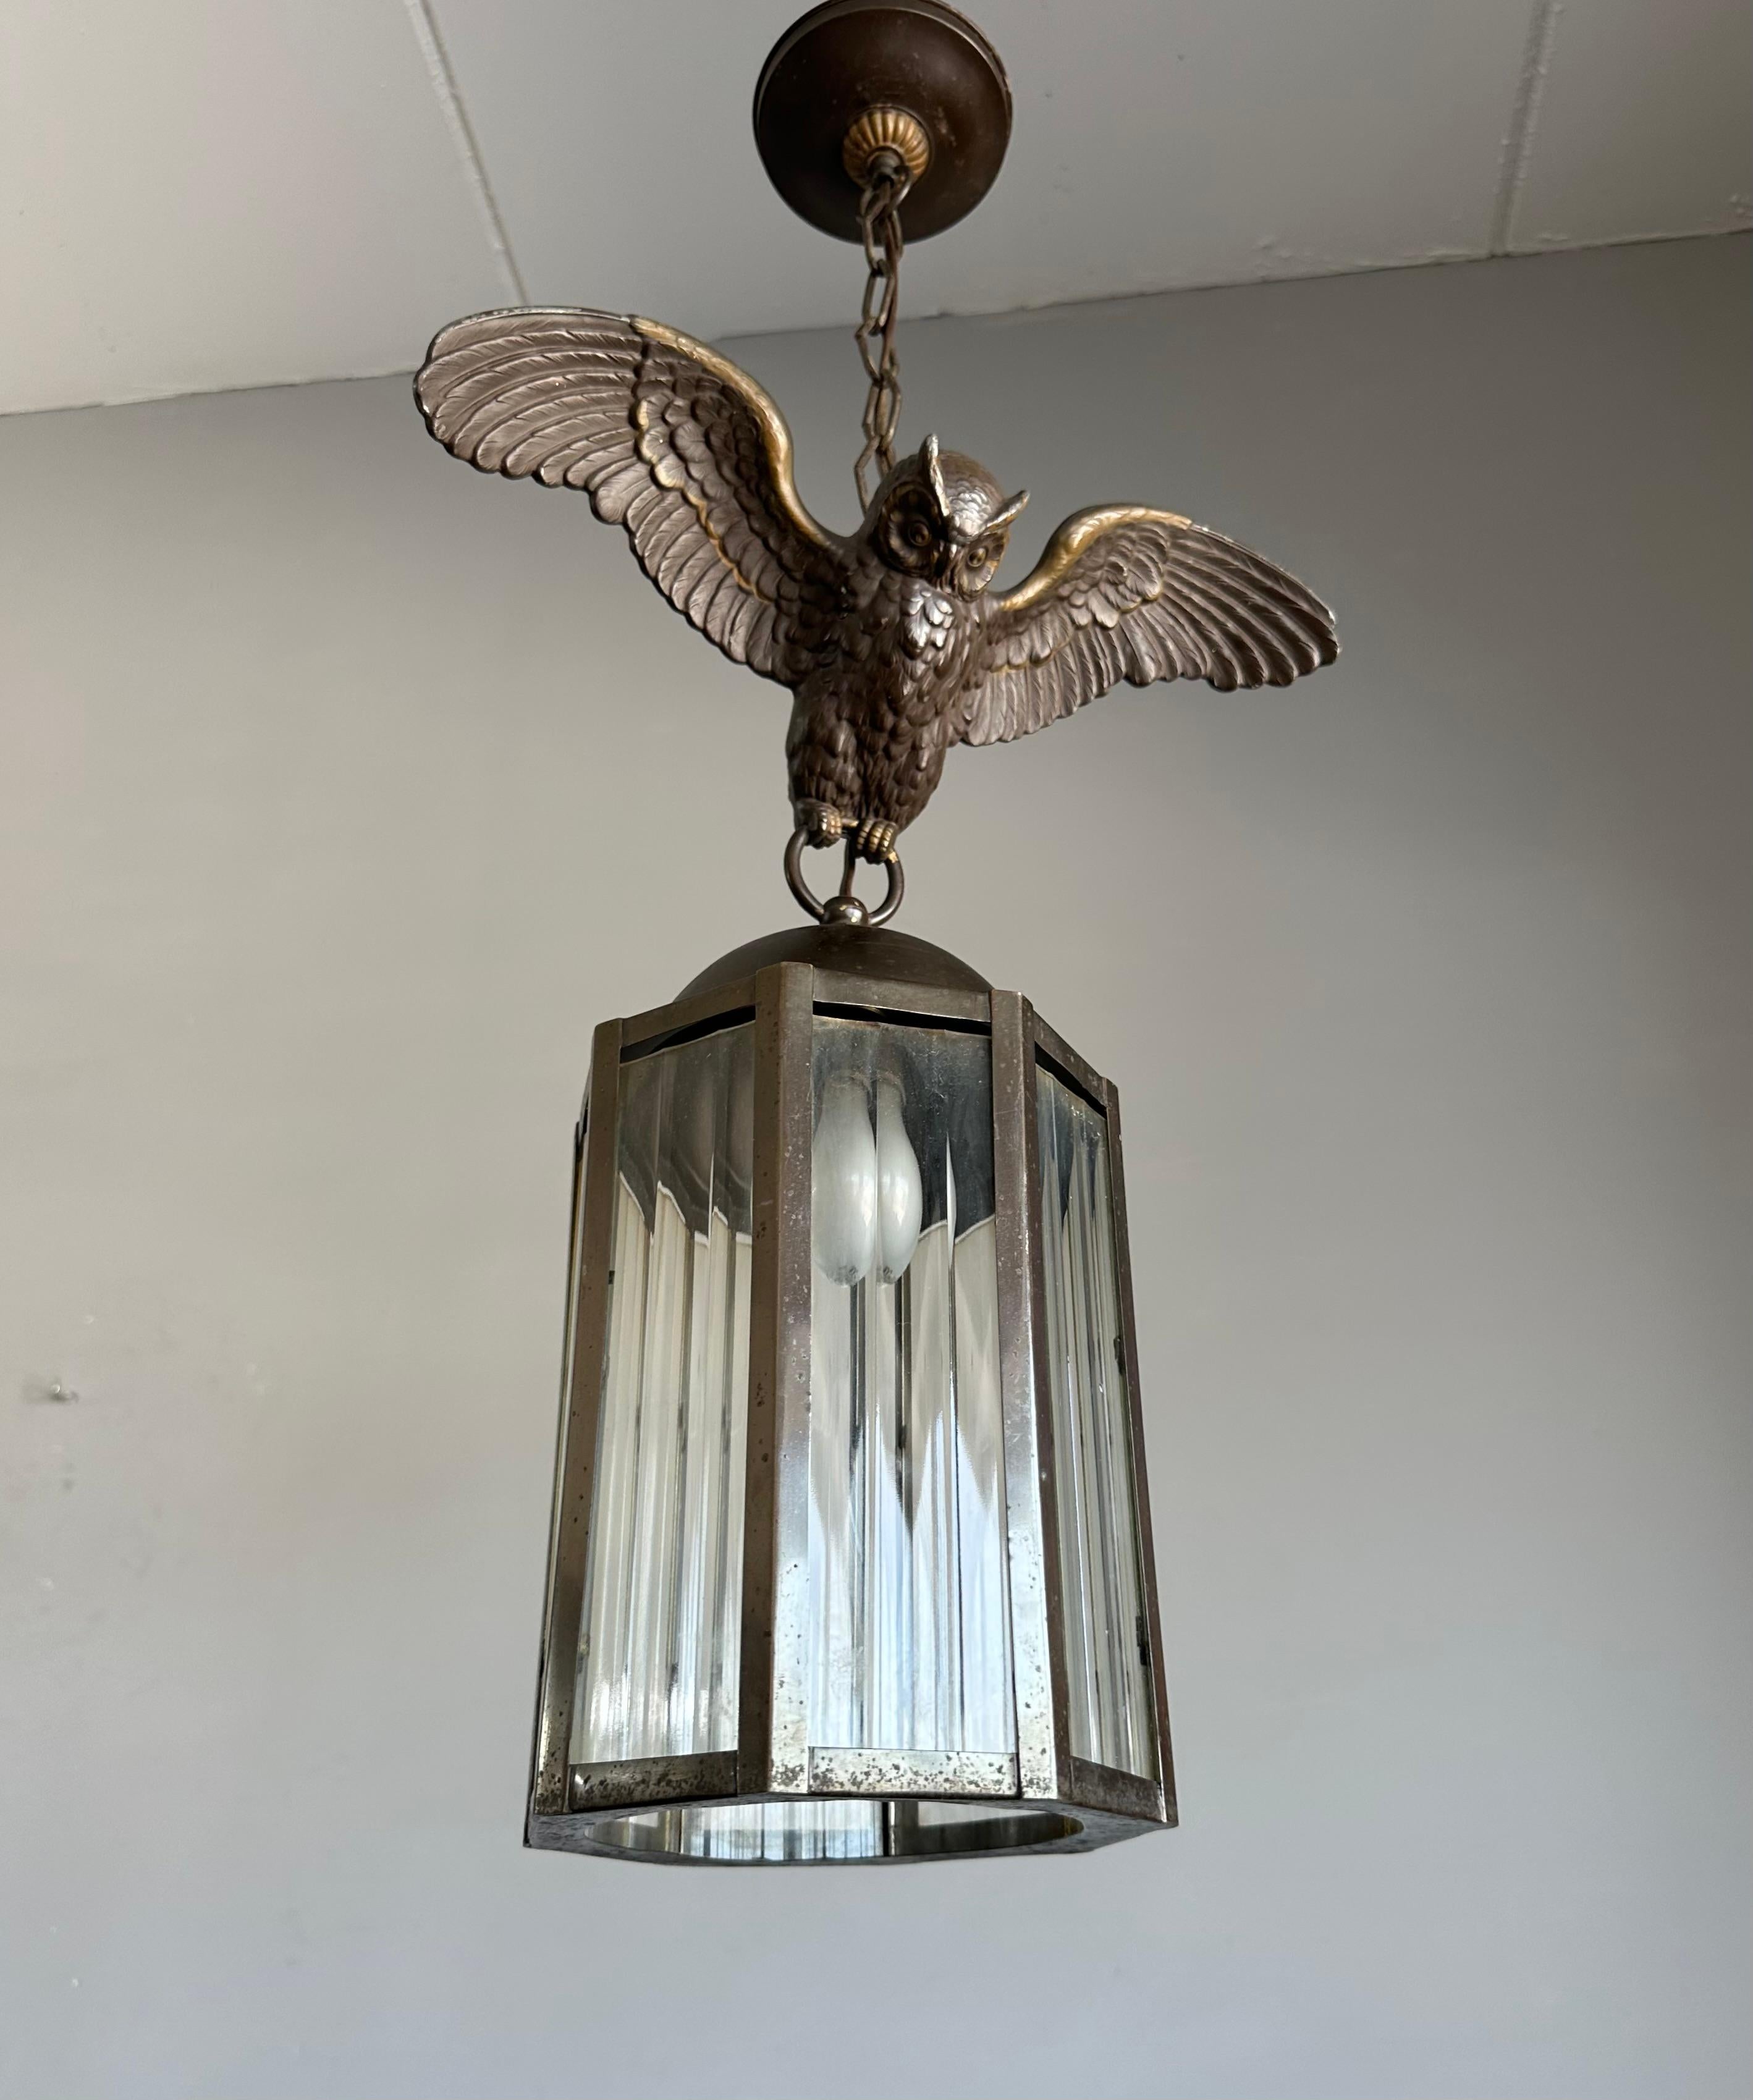 Cast Arts and Crafts Era Flying Owl Sculpture Pendant Light or Lantern with Cut Glass For Sale